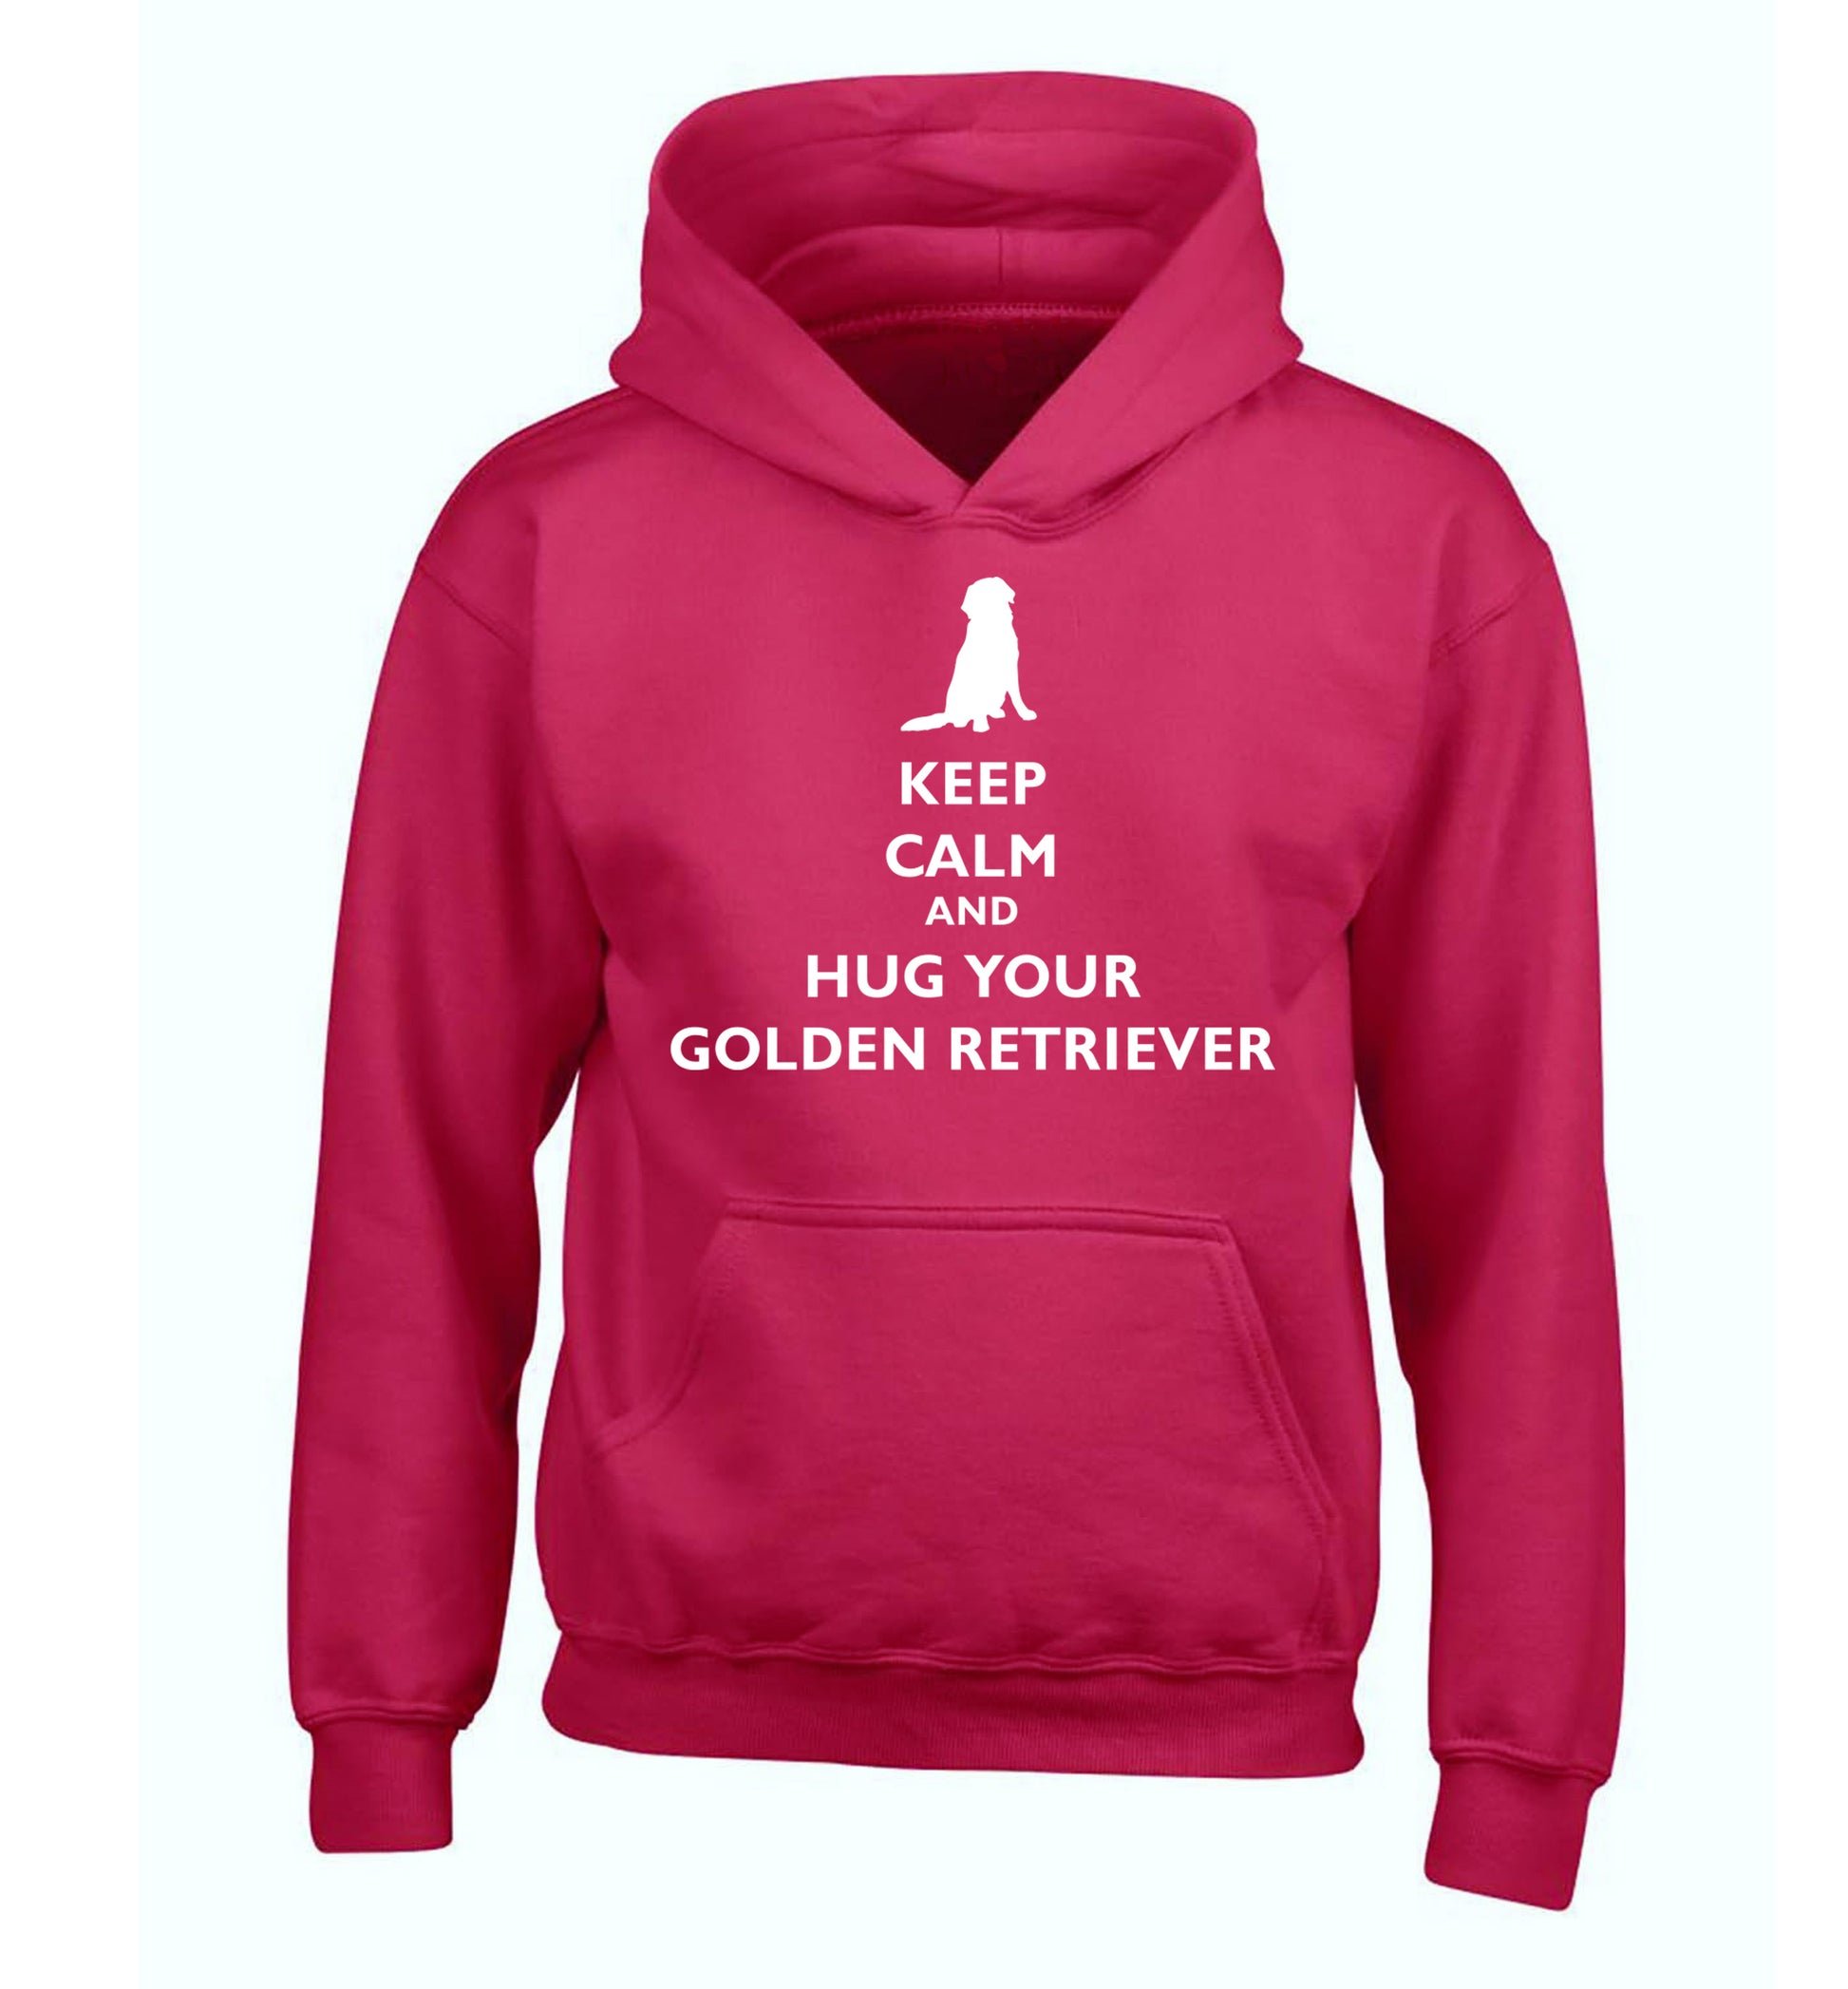 Keep calm and hug your golden retriever children's pink hoodie 12-13 Years